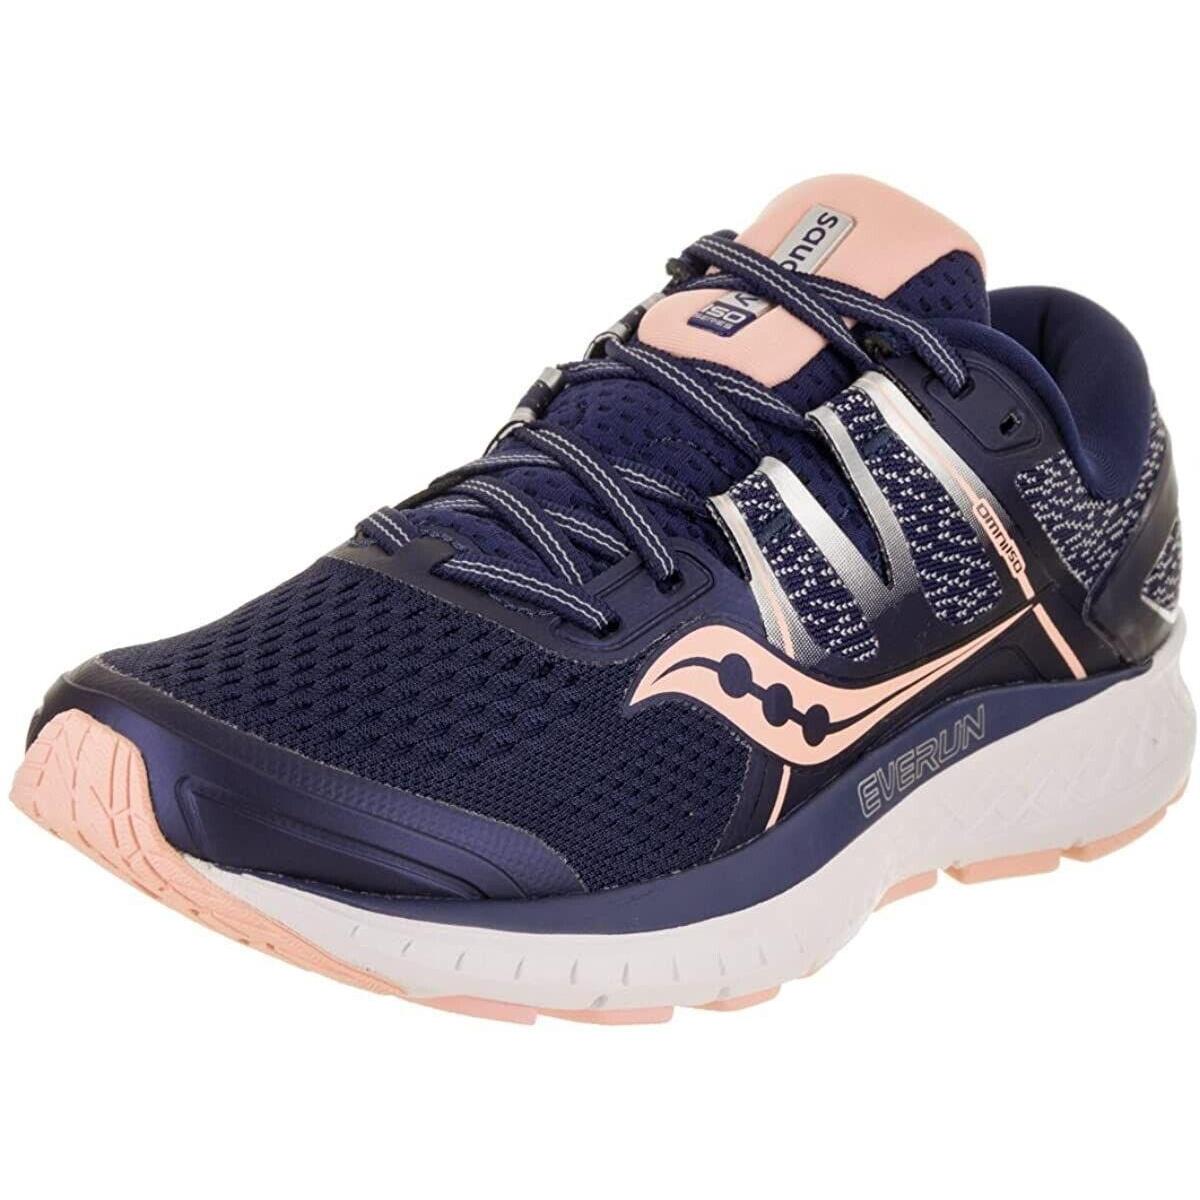 Saucony Omni Iso Women s Size 5 Navy Stability Running Shoes Training Sneakers